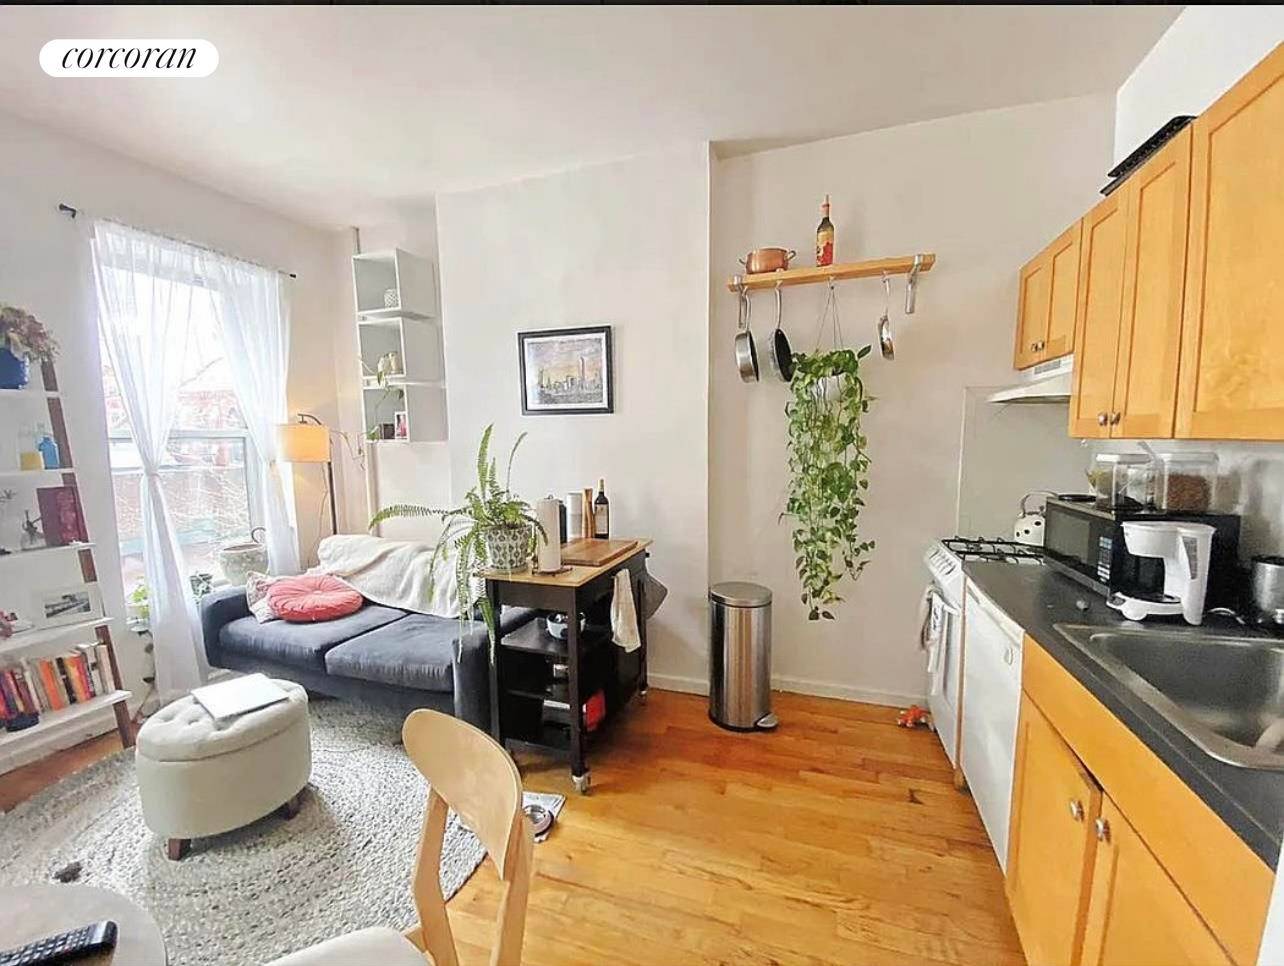 Stunning, Bright amp ; Sunny with large south facing windows, One bedroom apartment with amenities, perfectly located in Park Slope for an amazing price.